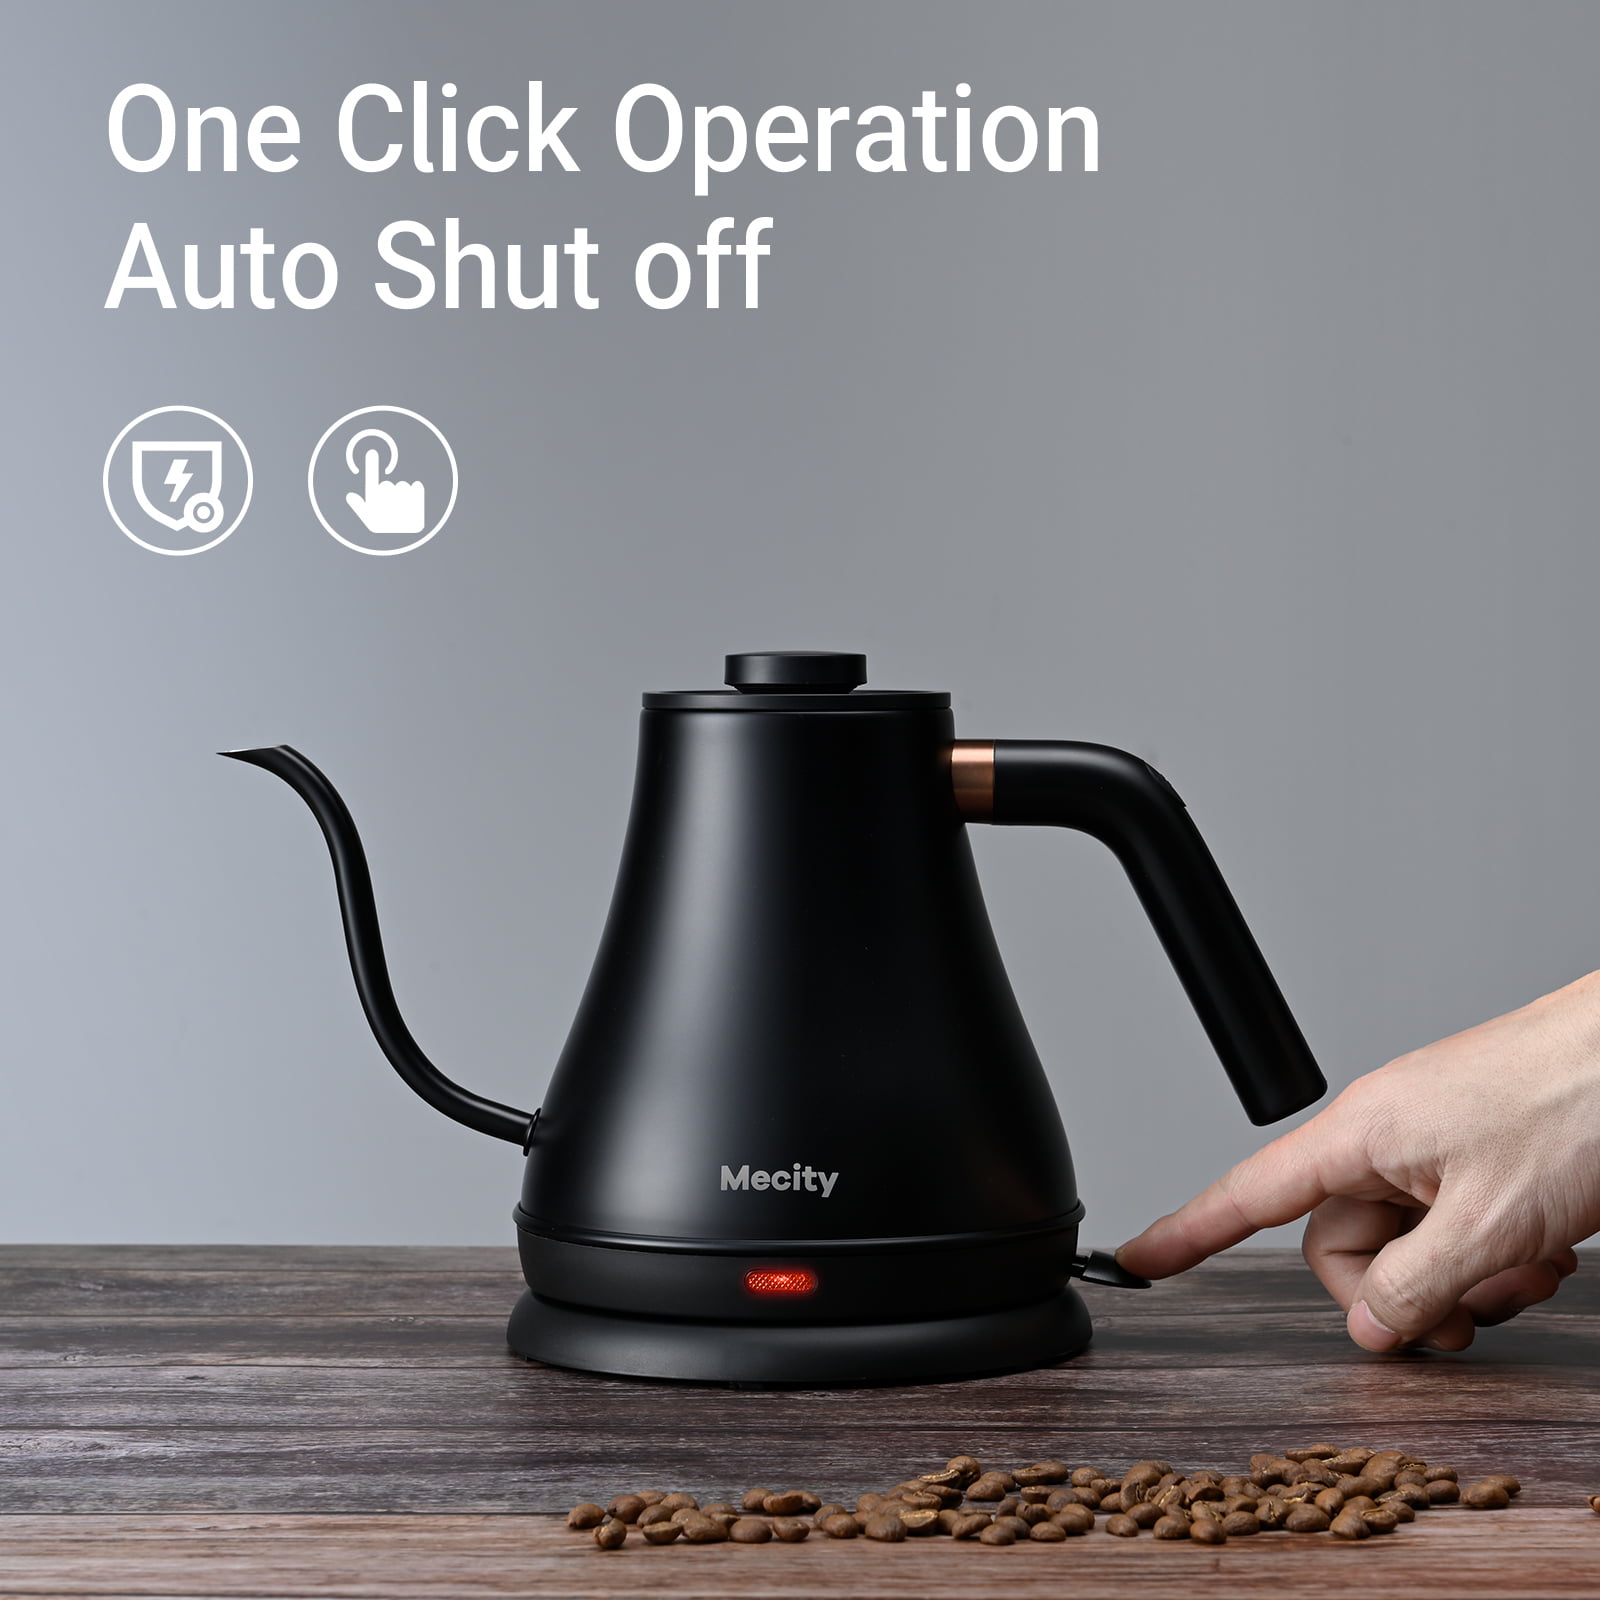 Htic battery operated kettle offer at Game